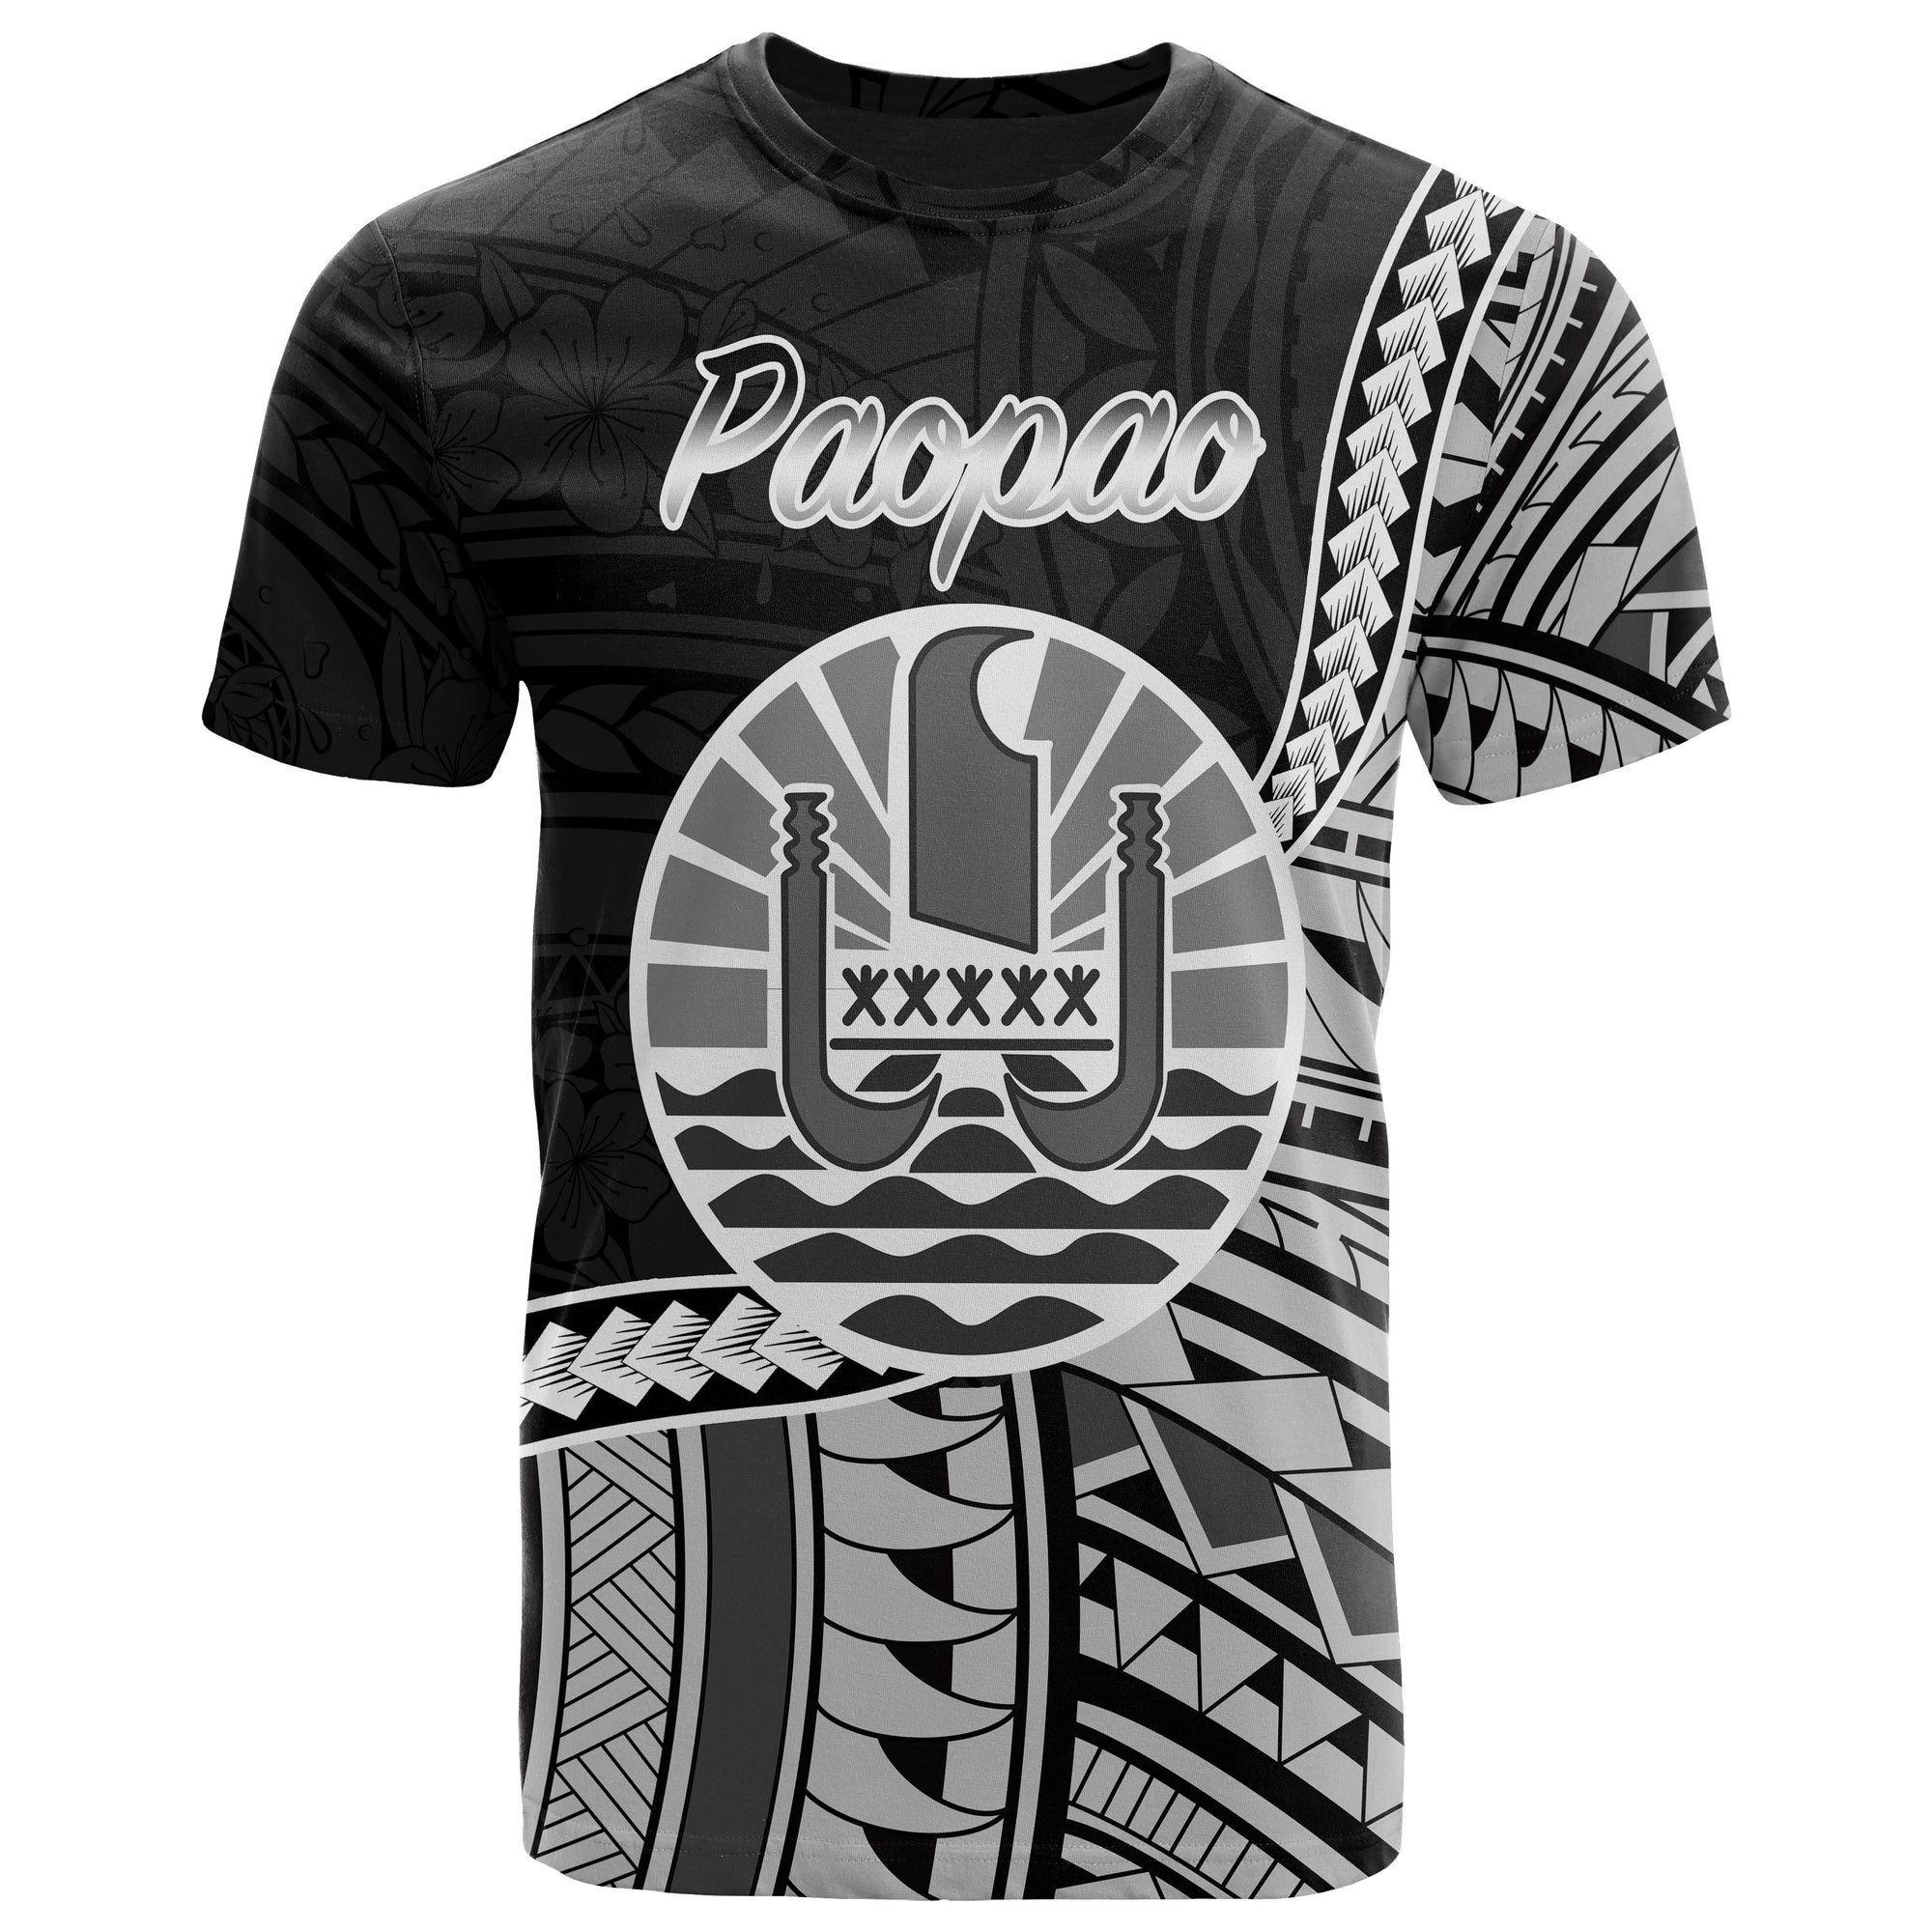 French Polynesia T Shirt Paopao Seal of French Polynesia Polynesian Patterns Unisex Black - Polynesian Pride